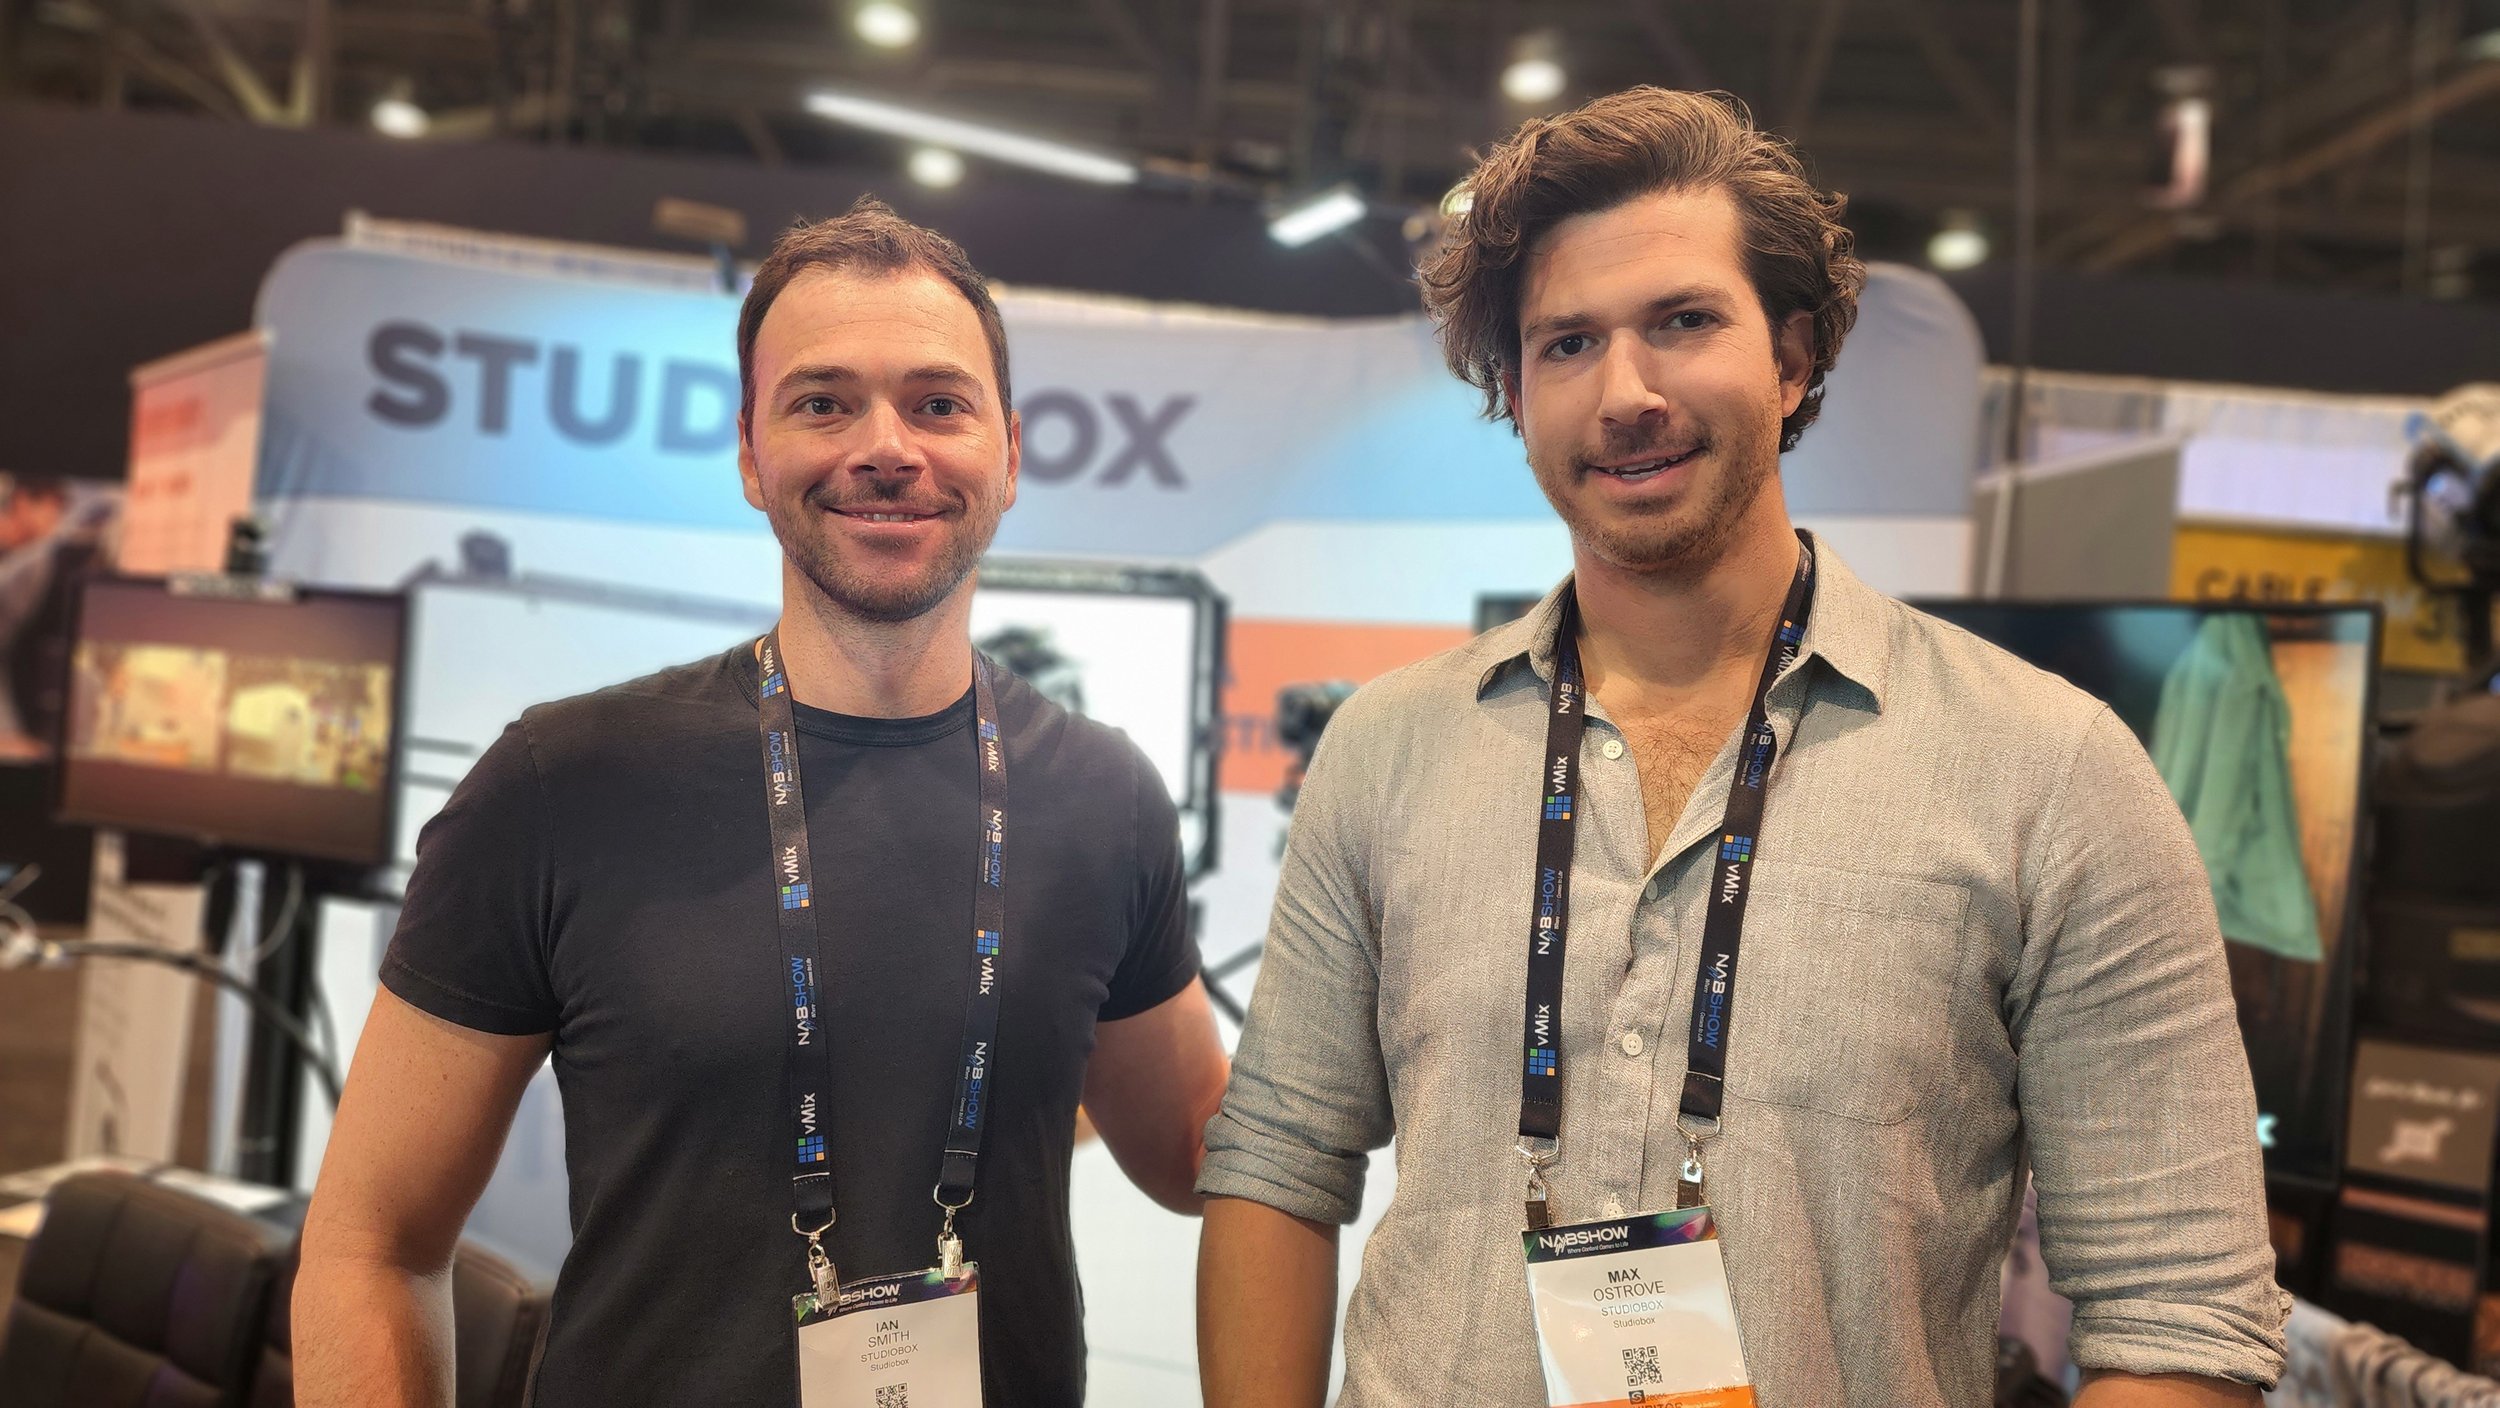 Founders Ian Smith and Max Ostrove